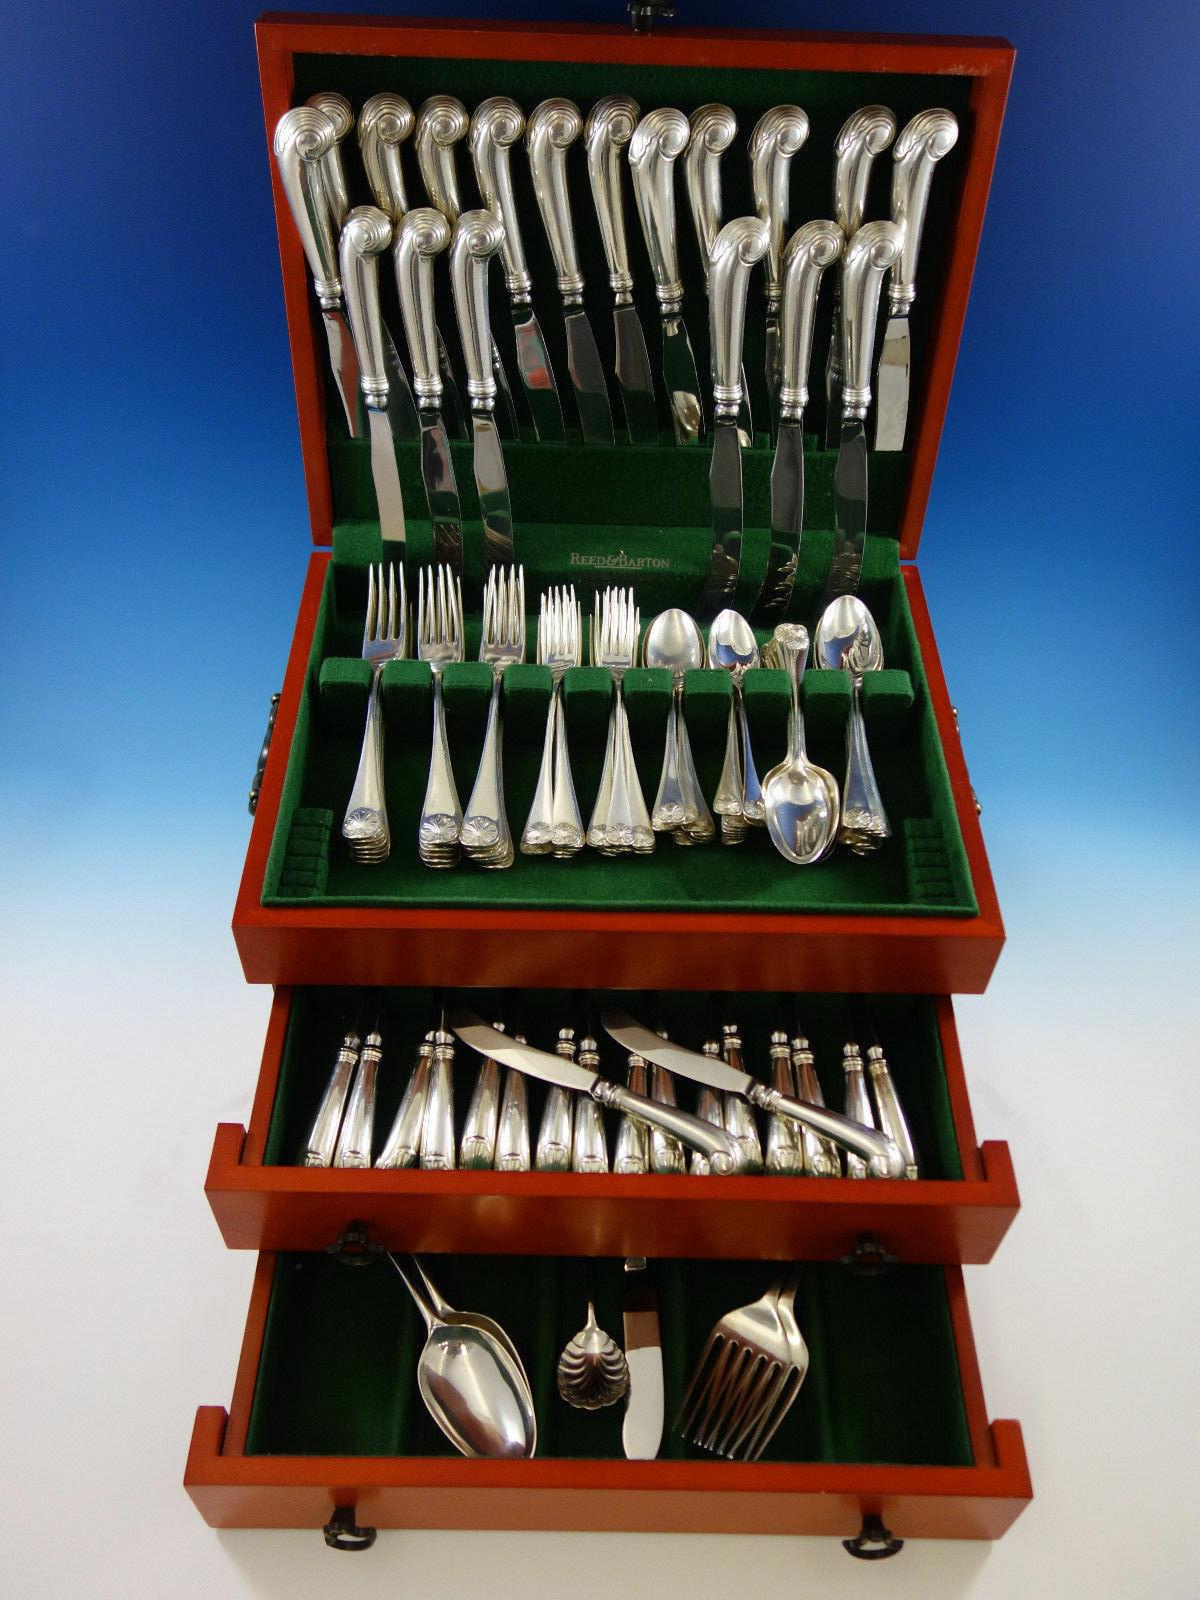 Monumental Williamsburg shell by Stieff dinner size sterling silver flatware set, 114 pieces. This set includes:

18 dinner size knives, pistol grip, 9 3/4